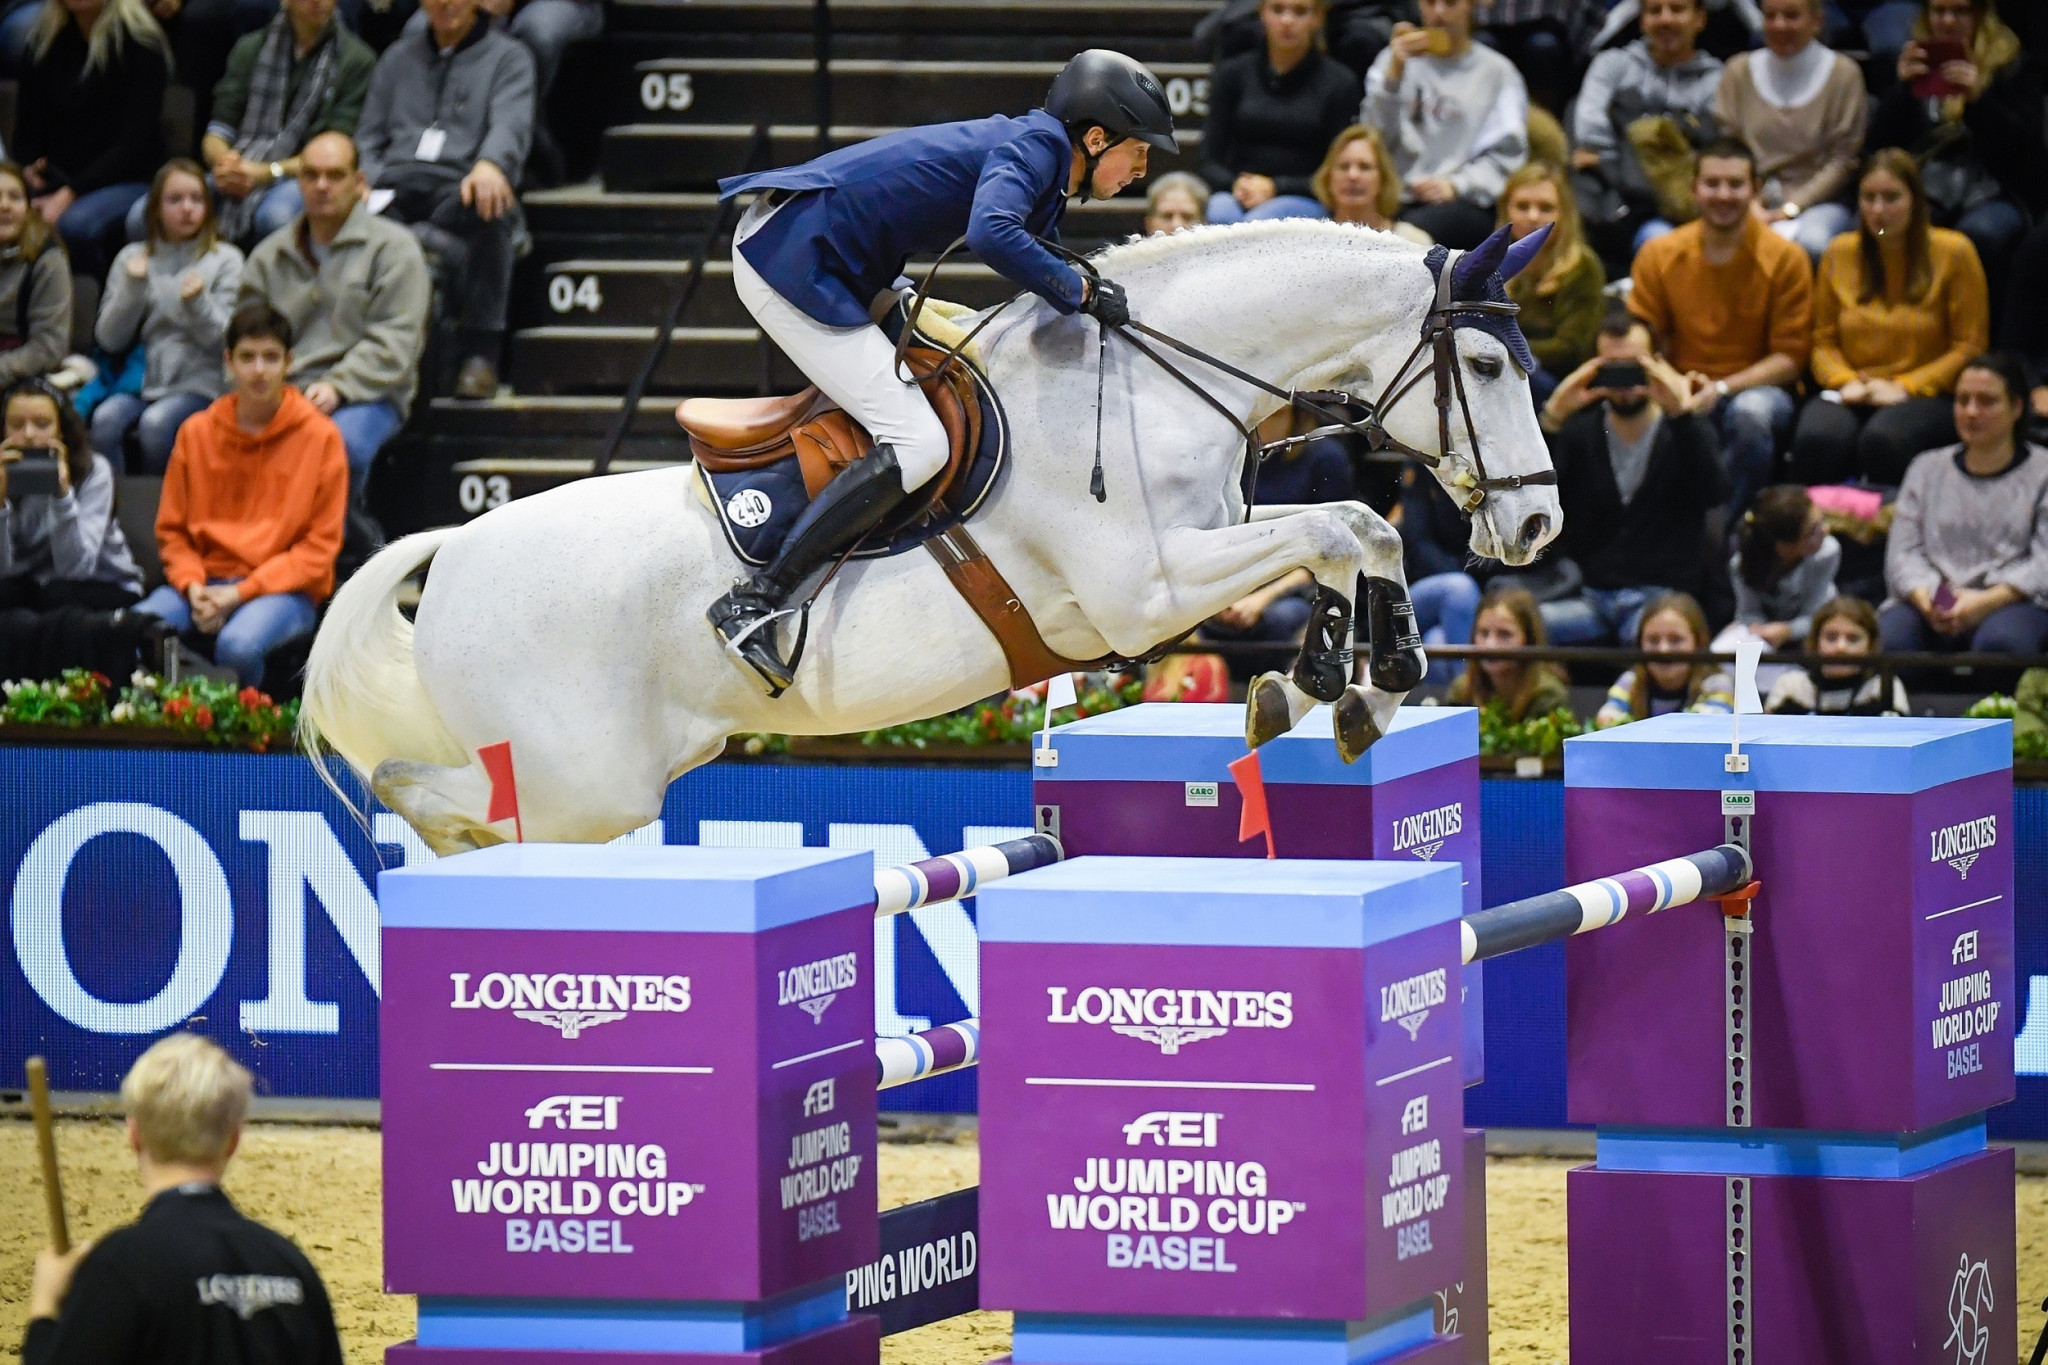 Martin Fuchs triumphed in front of a home crowd in Basel ©FEI